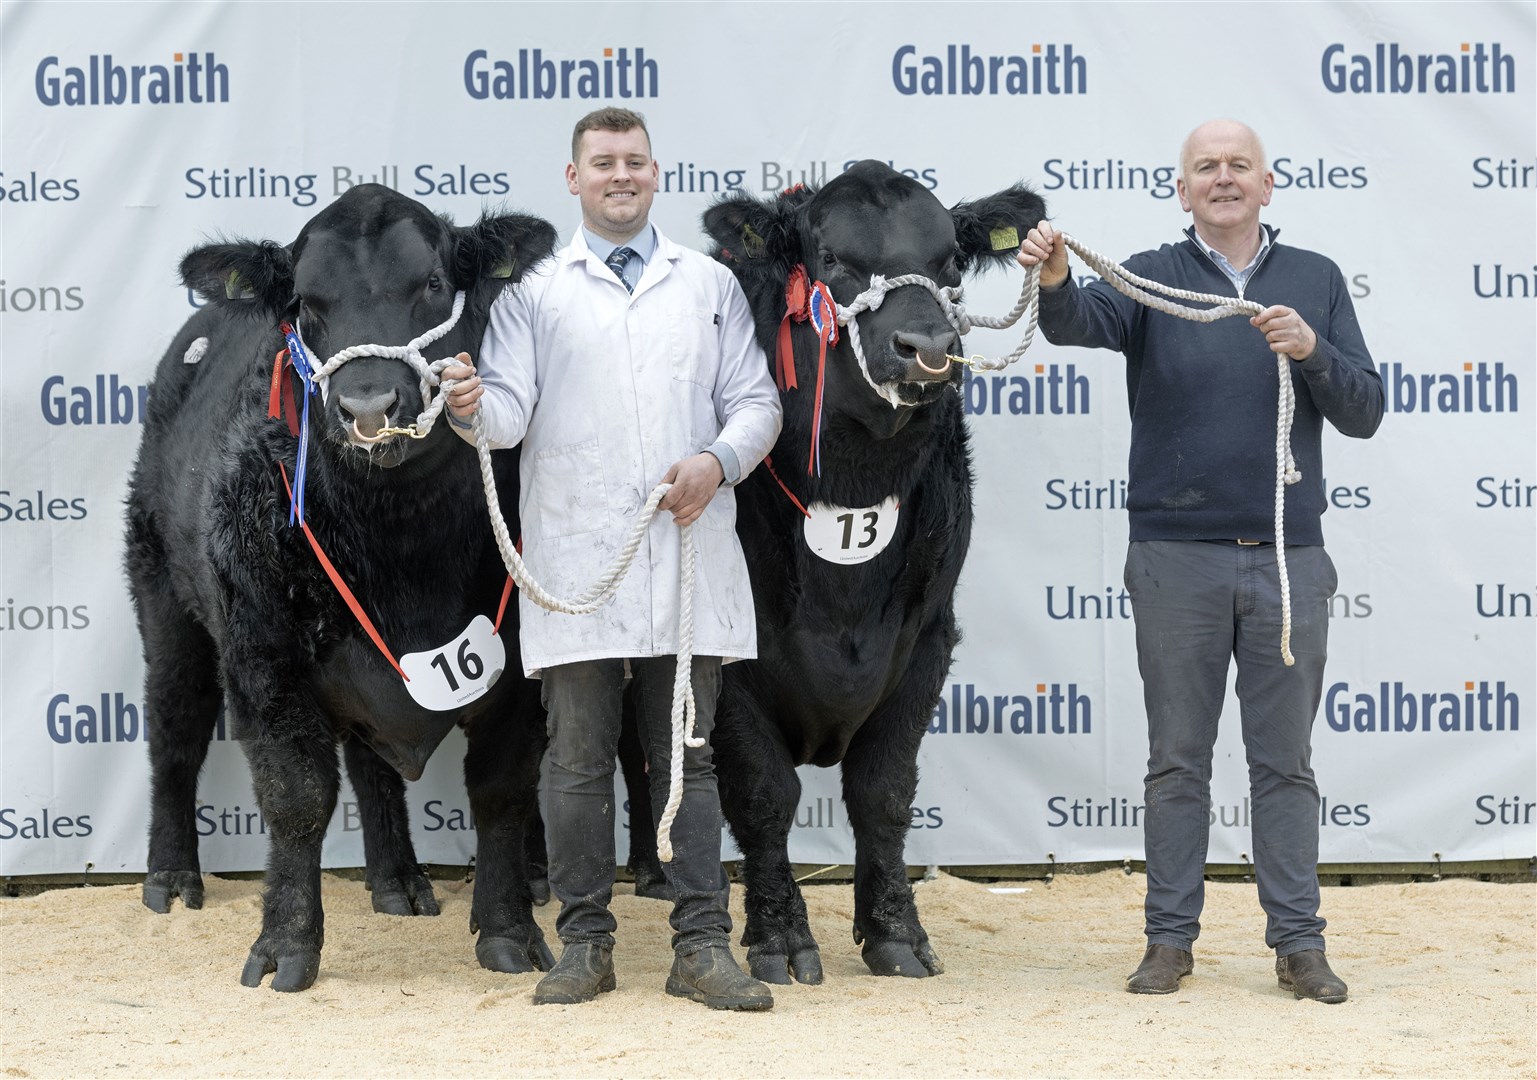 Neil and Mark Wattie with their Aberdeen-Angus champion and reserve which sold for 24,000gns and 16,000gns. The champion is on the right with Neil Wattie at the halter and his son, Mark, is holding the reserve champion on the left. Picture: Ron Stephen Photography